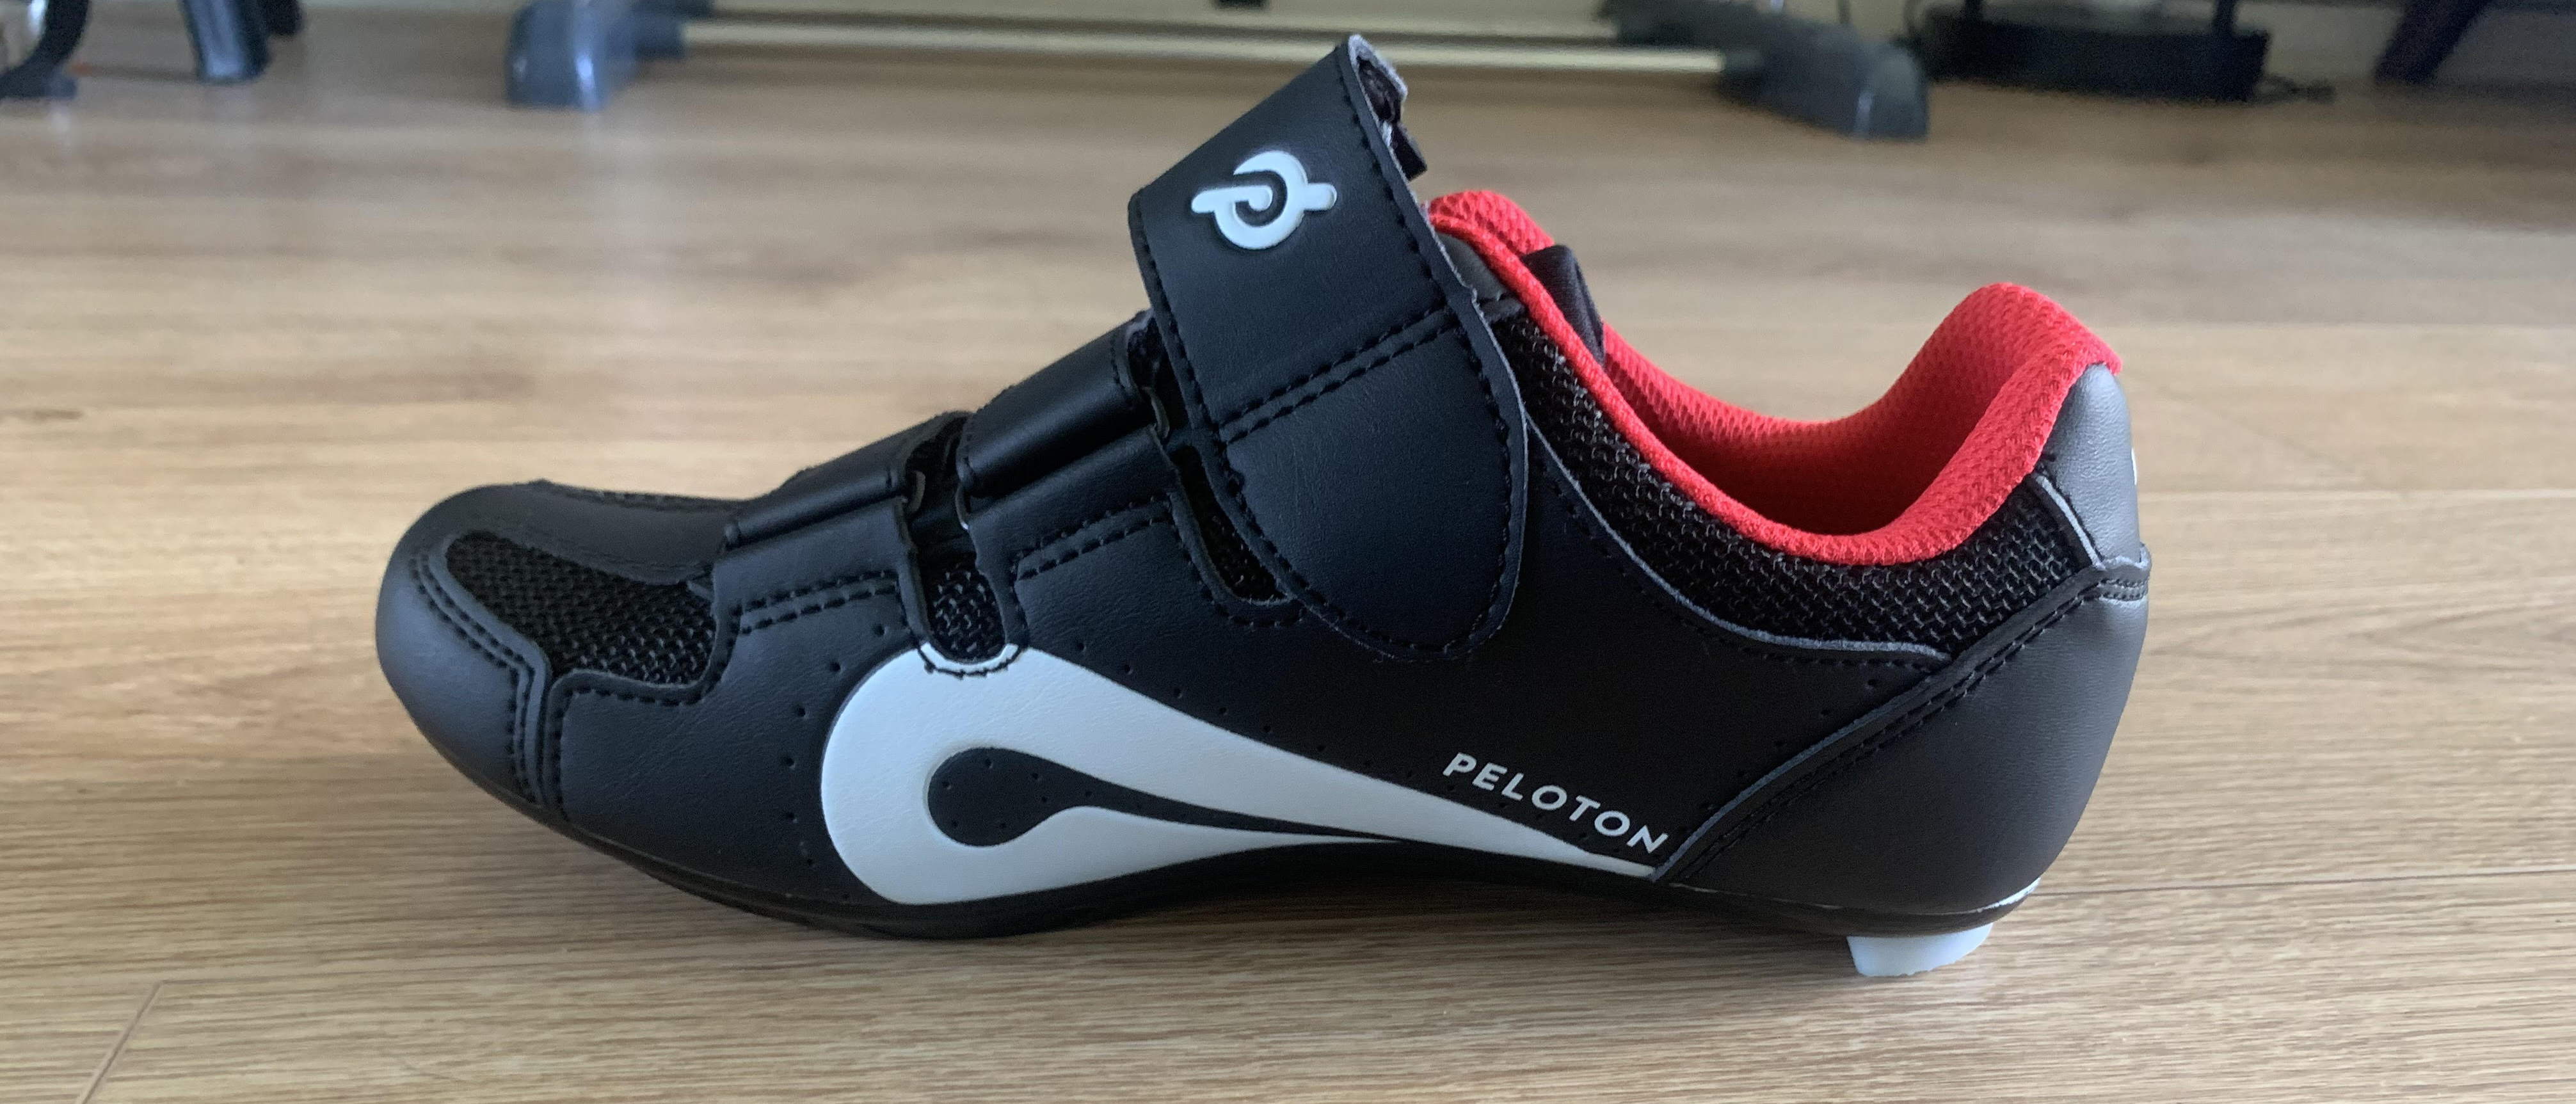 Peloton cycling shoes on wooden floor